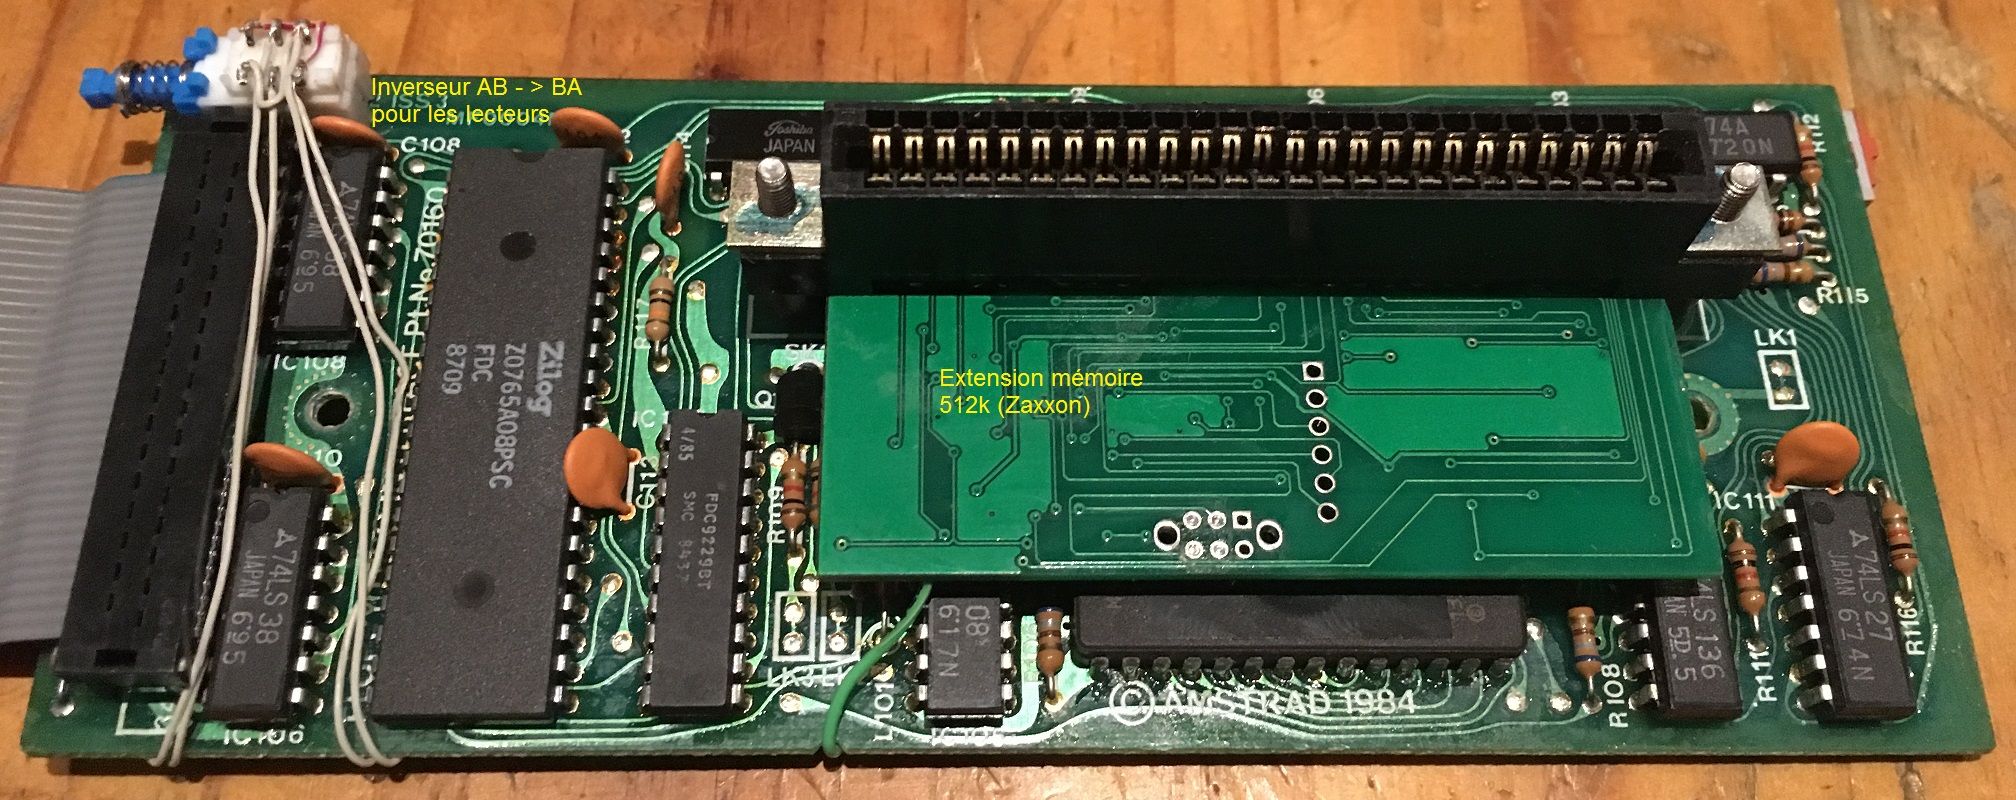 front of the modded Amstrad CPC DDI-1